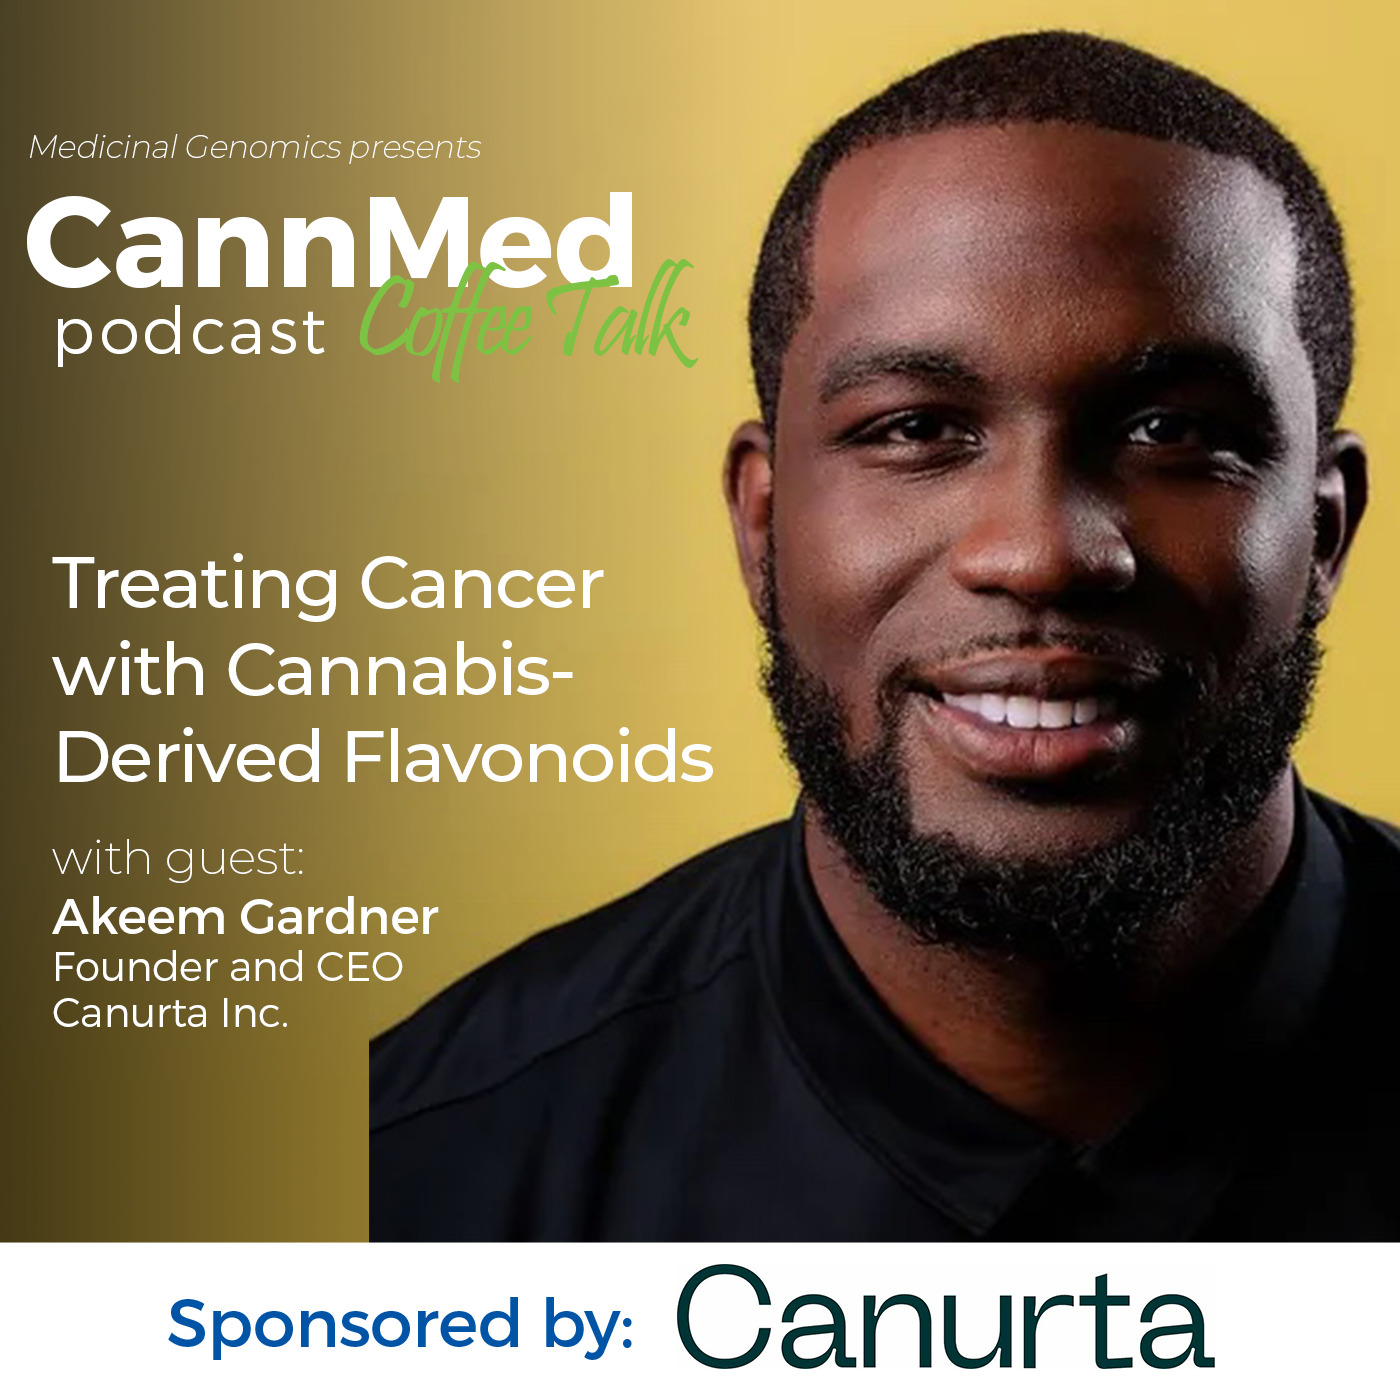 Featured image for “Treating Cancer with Cannabis-Derived Flavonoids with Akeem Gardner”